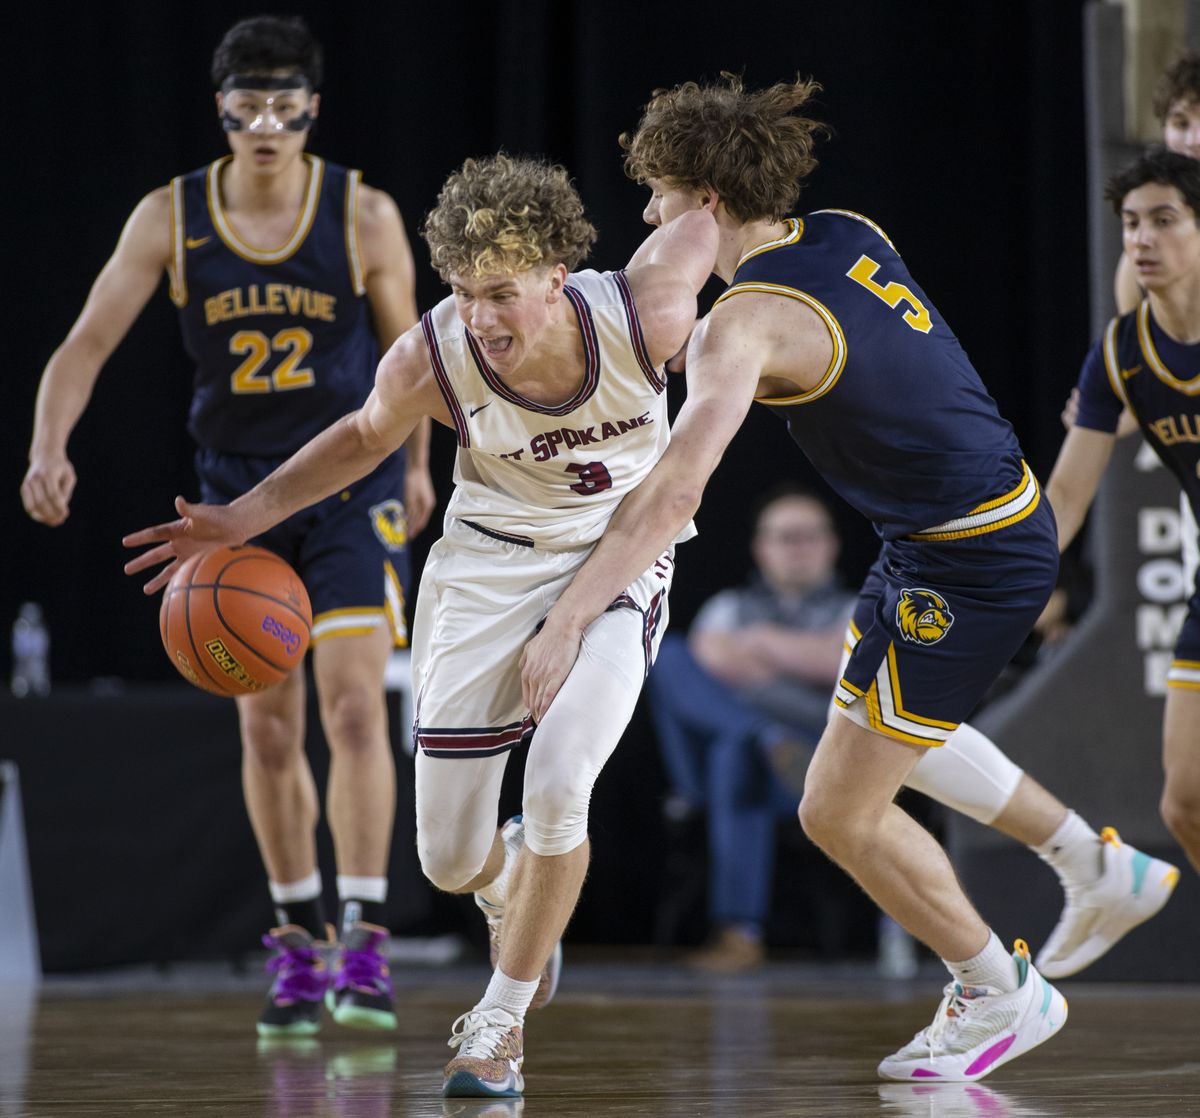 Mt. Spokane’s Ryan Lafferty draws a foul from Bellevue’s Andrew Gooding on Thursday in the State 3A basketball tournament in Tacoma.  (Patrick Hagerty)